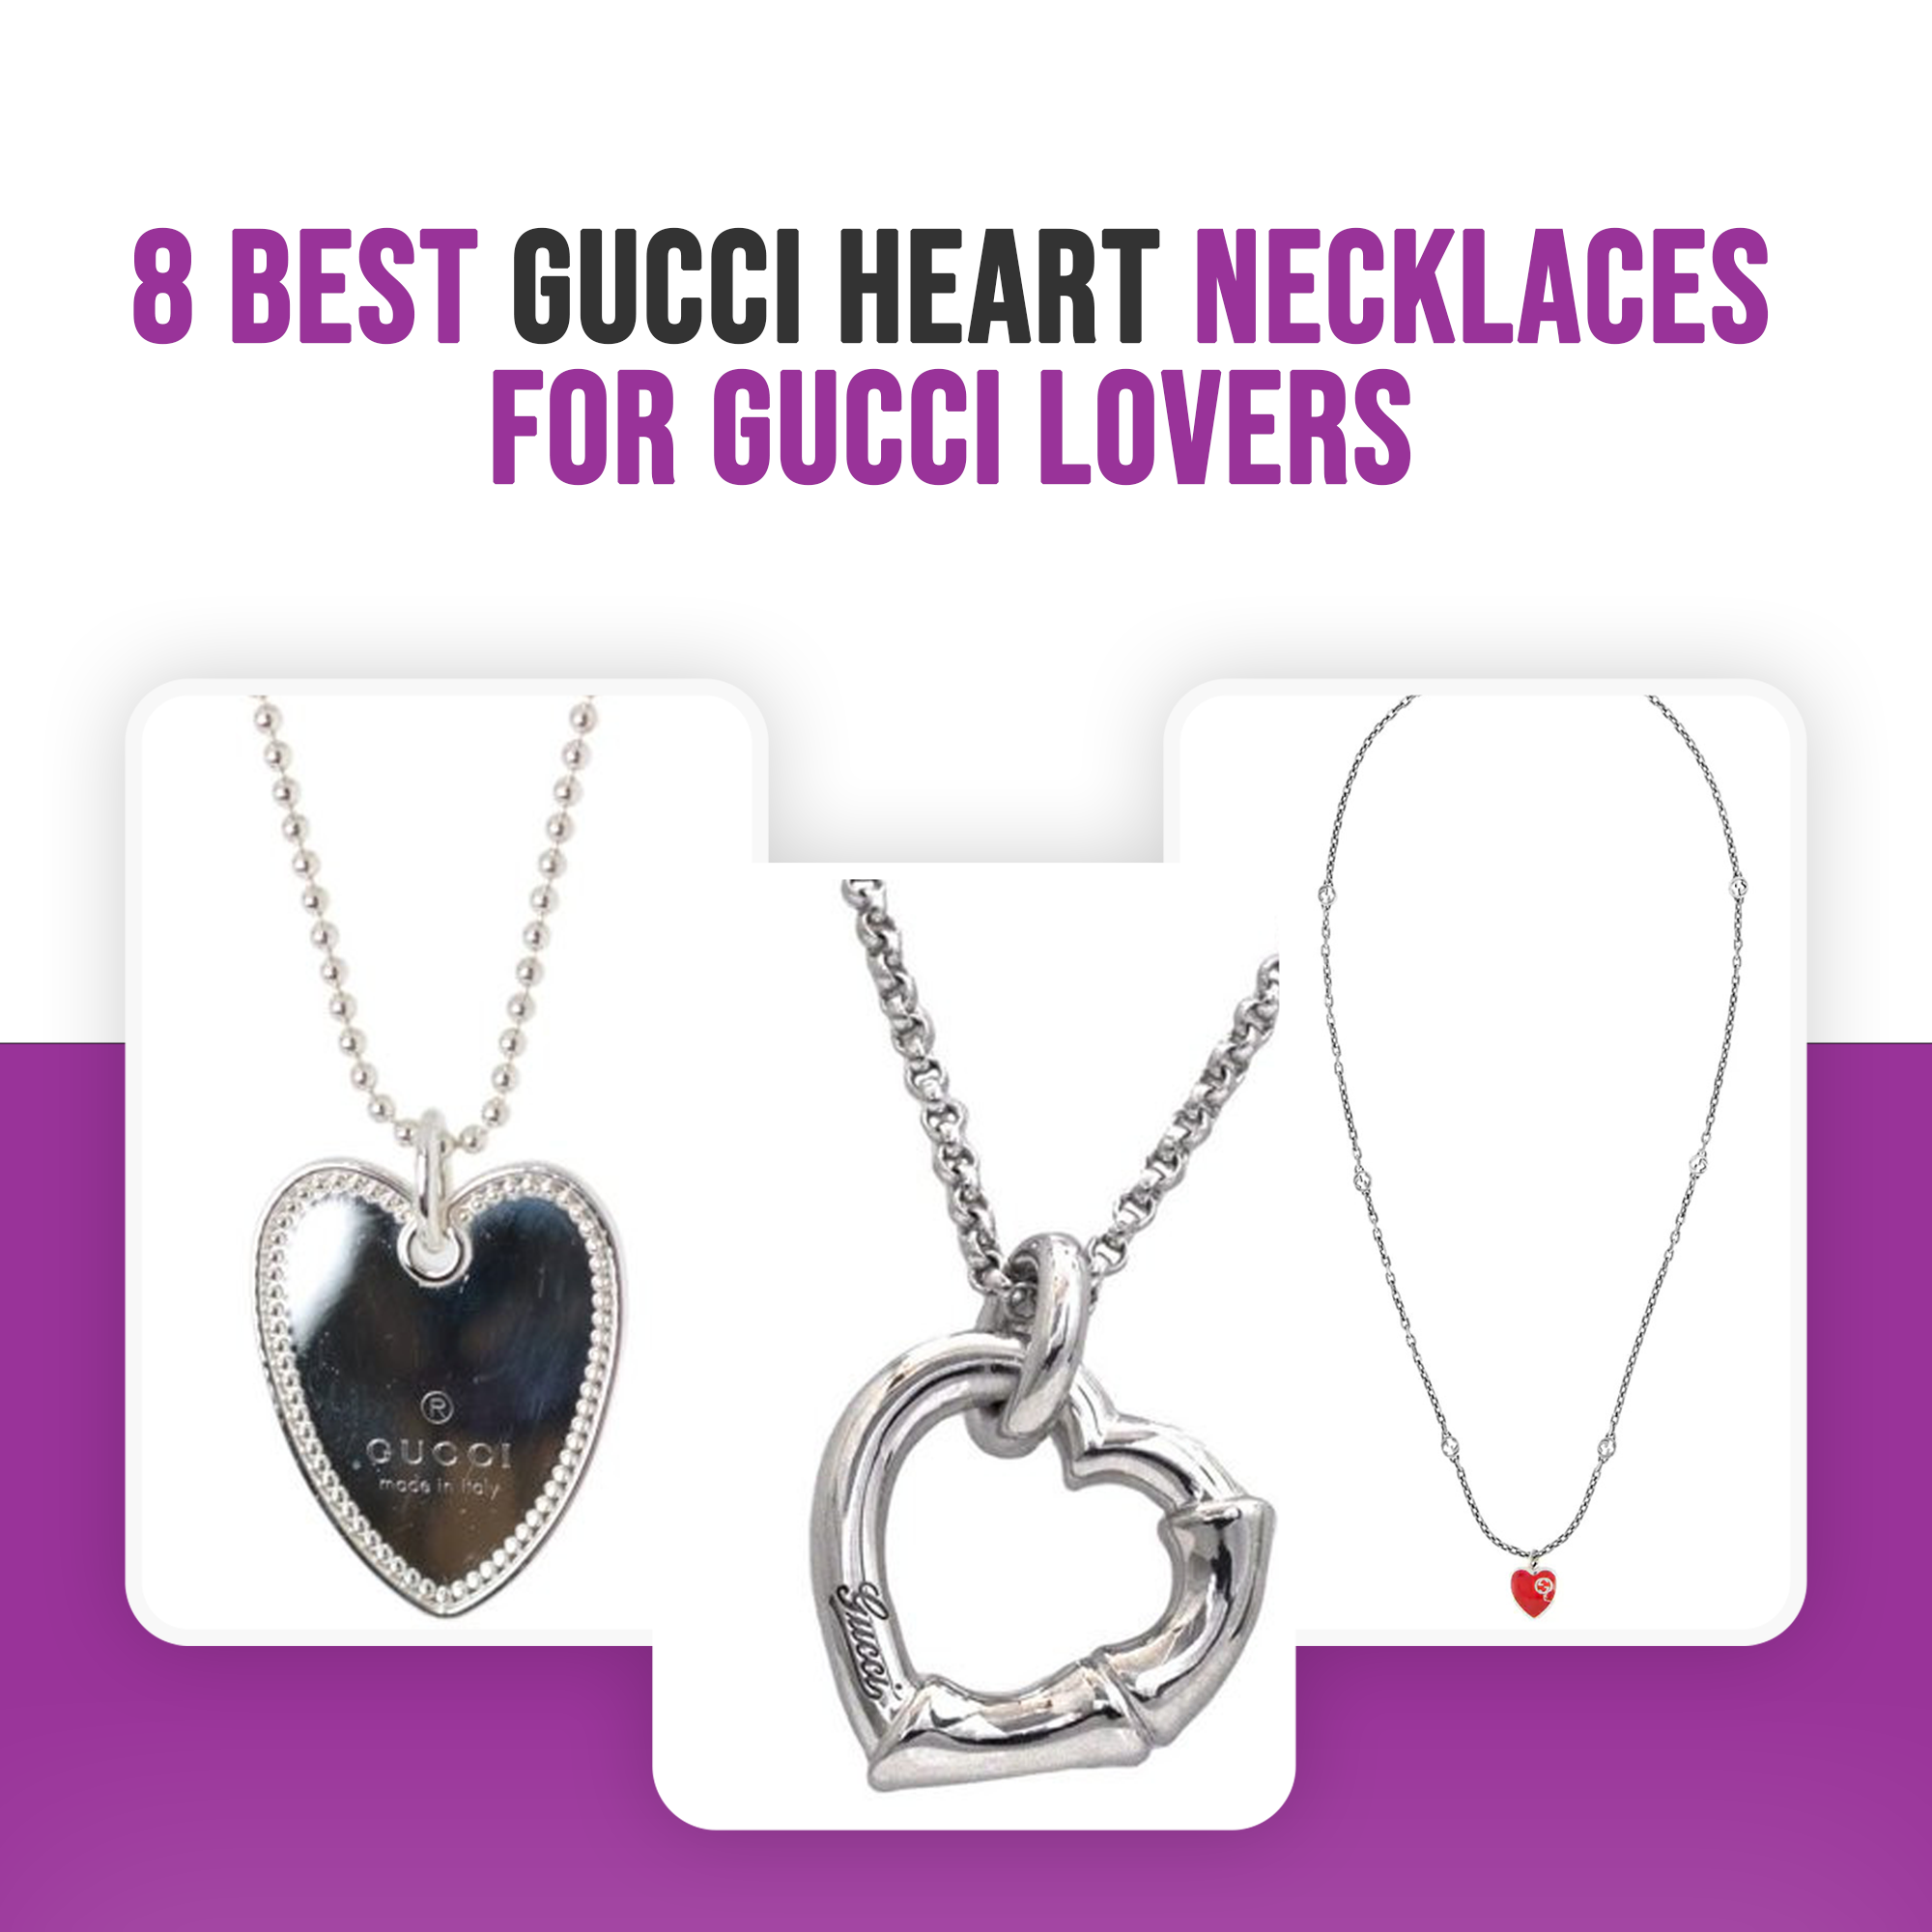 8 Best Gucci Heart Necklaces For Gucci Lovers